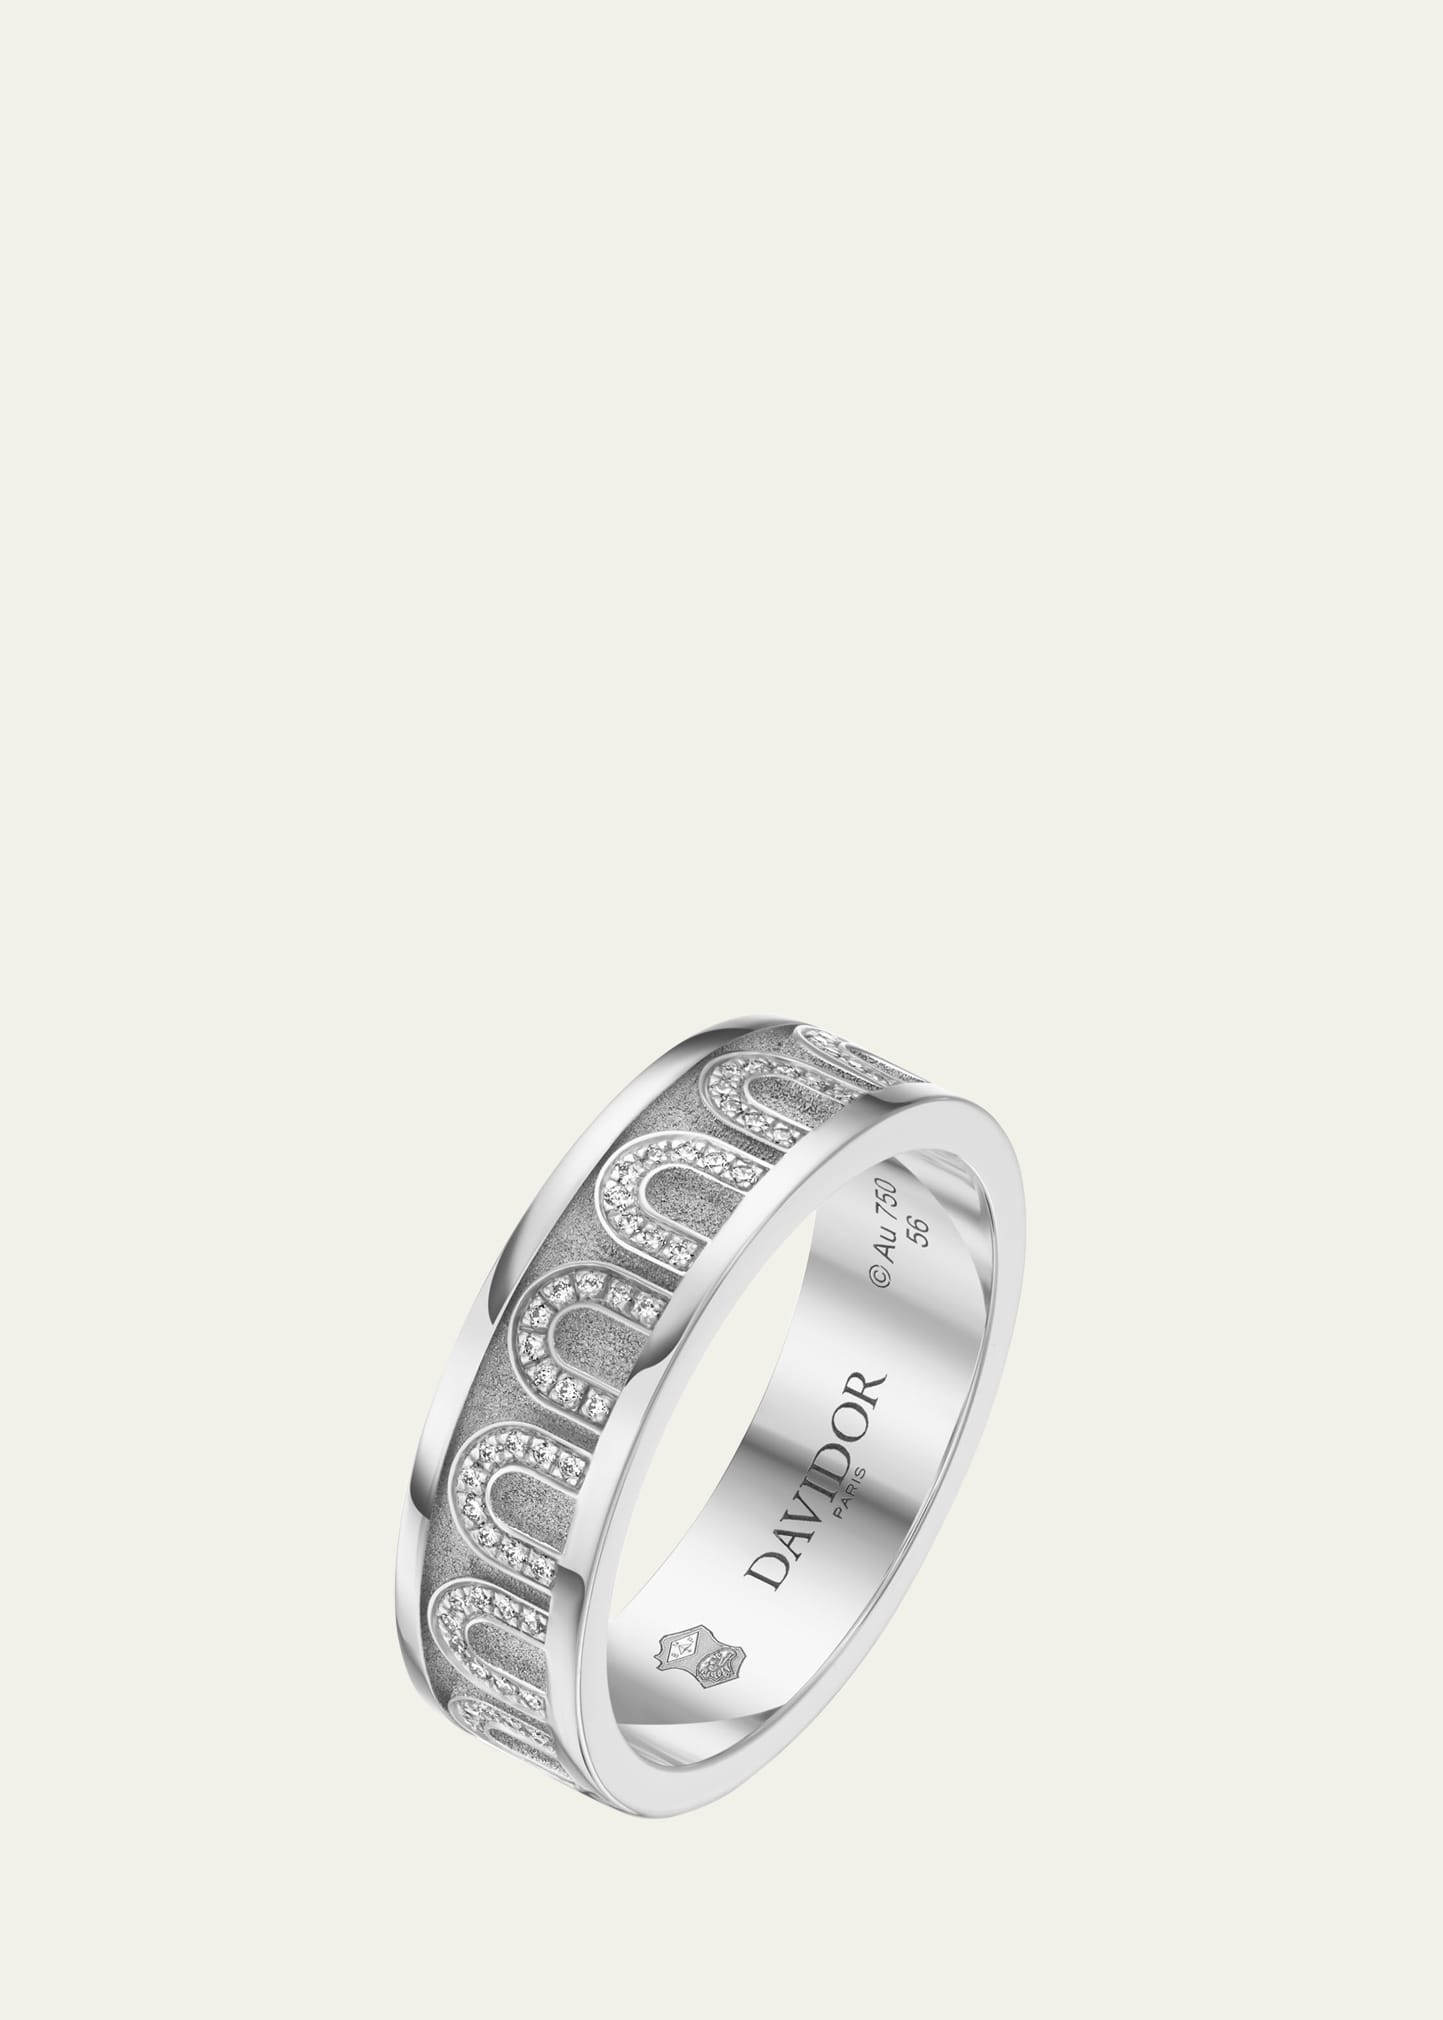 L'Arc de DAVIDOR Ring MM in 18K White Gold with Satin Finish and Arcade Diamonds